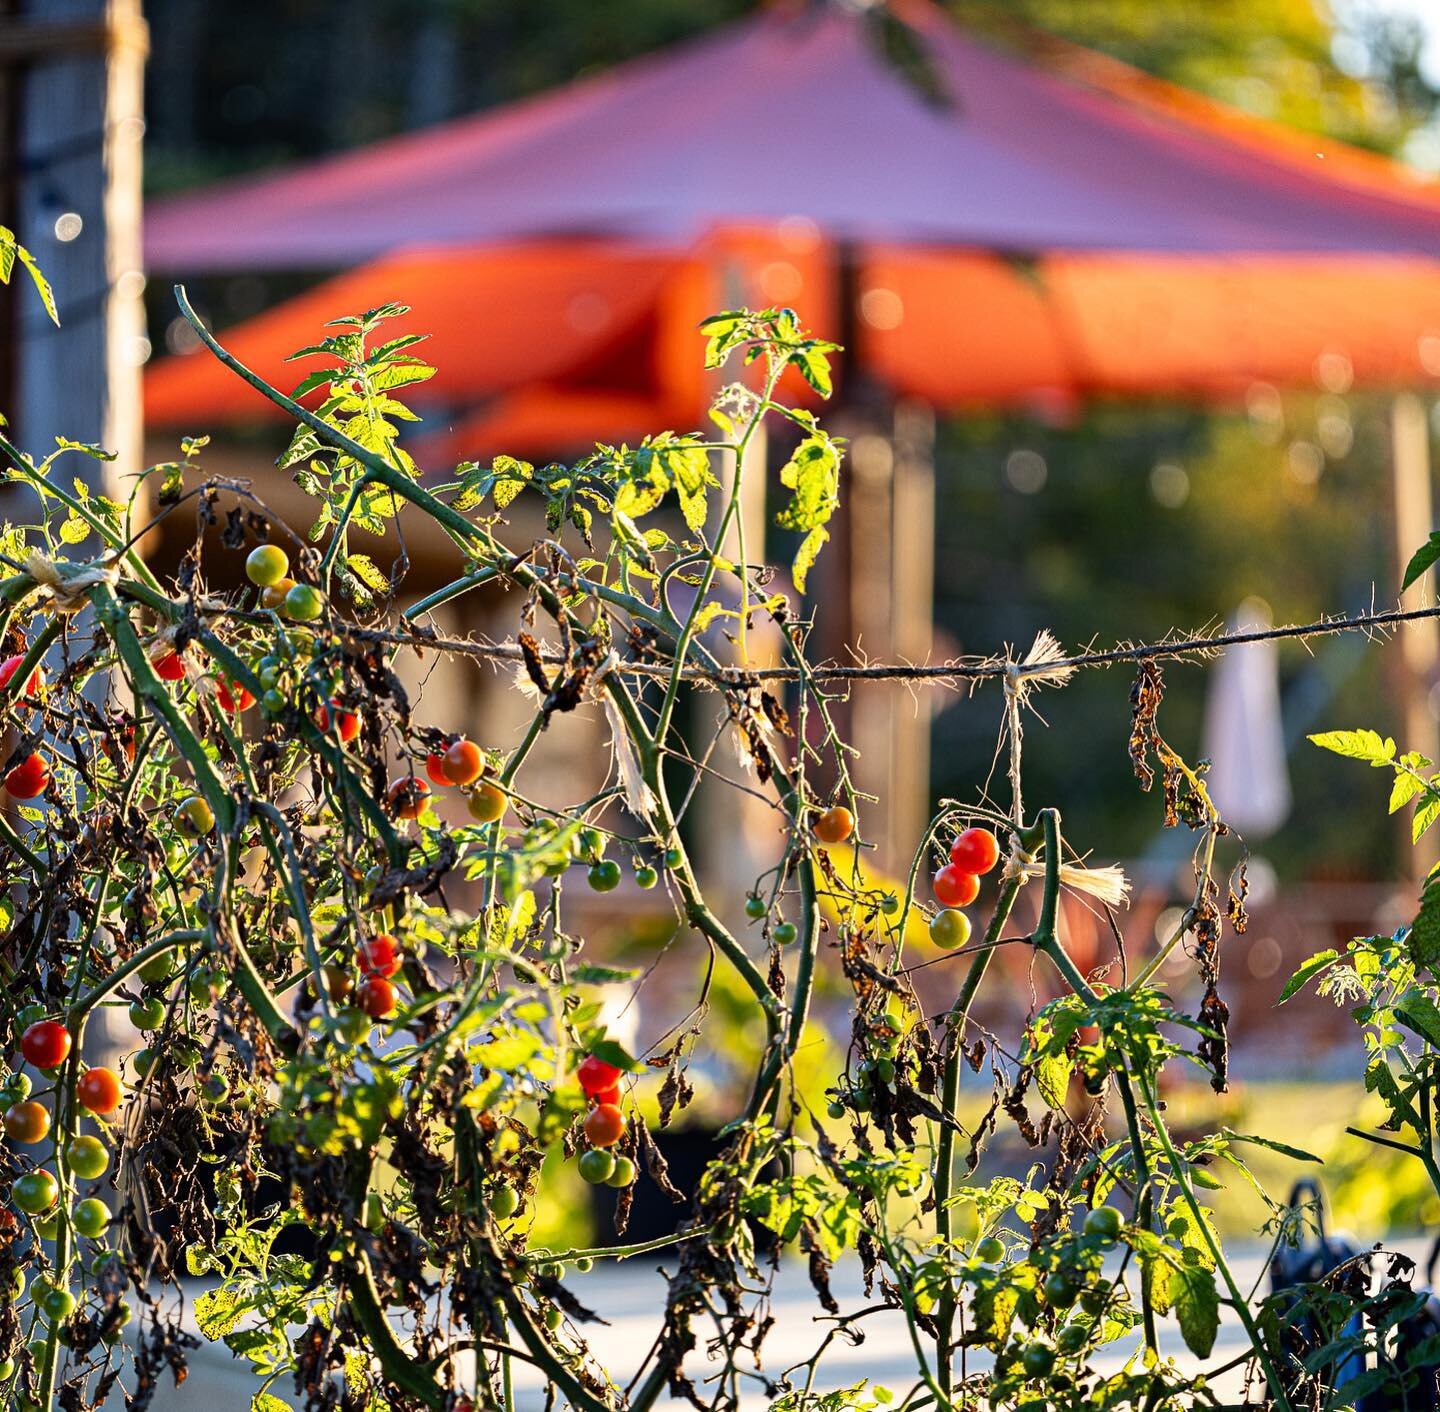 Autumn light makes this garden shine. What else have you found shines at #wanderatlongwoods ?

Open: 
Wed - Saturday 4pm - 9pm
Sunday 4pm - 8pm
Reservations link in bio.

#autumn #maine #southernmaine #farmtotable #garden #veggies #tomatoes #goldenho